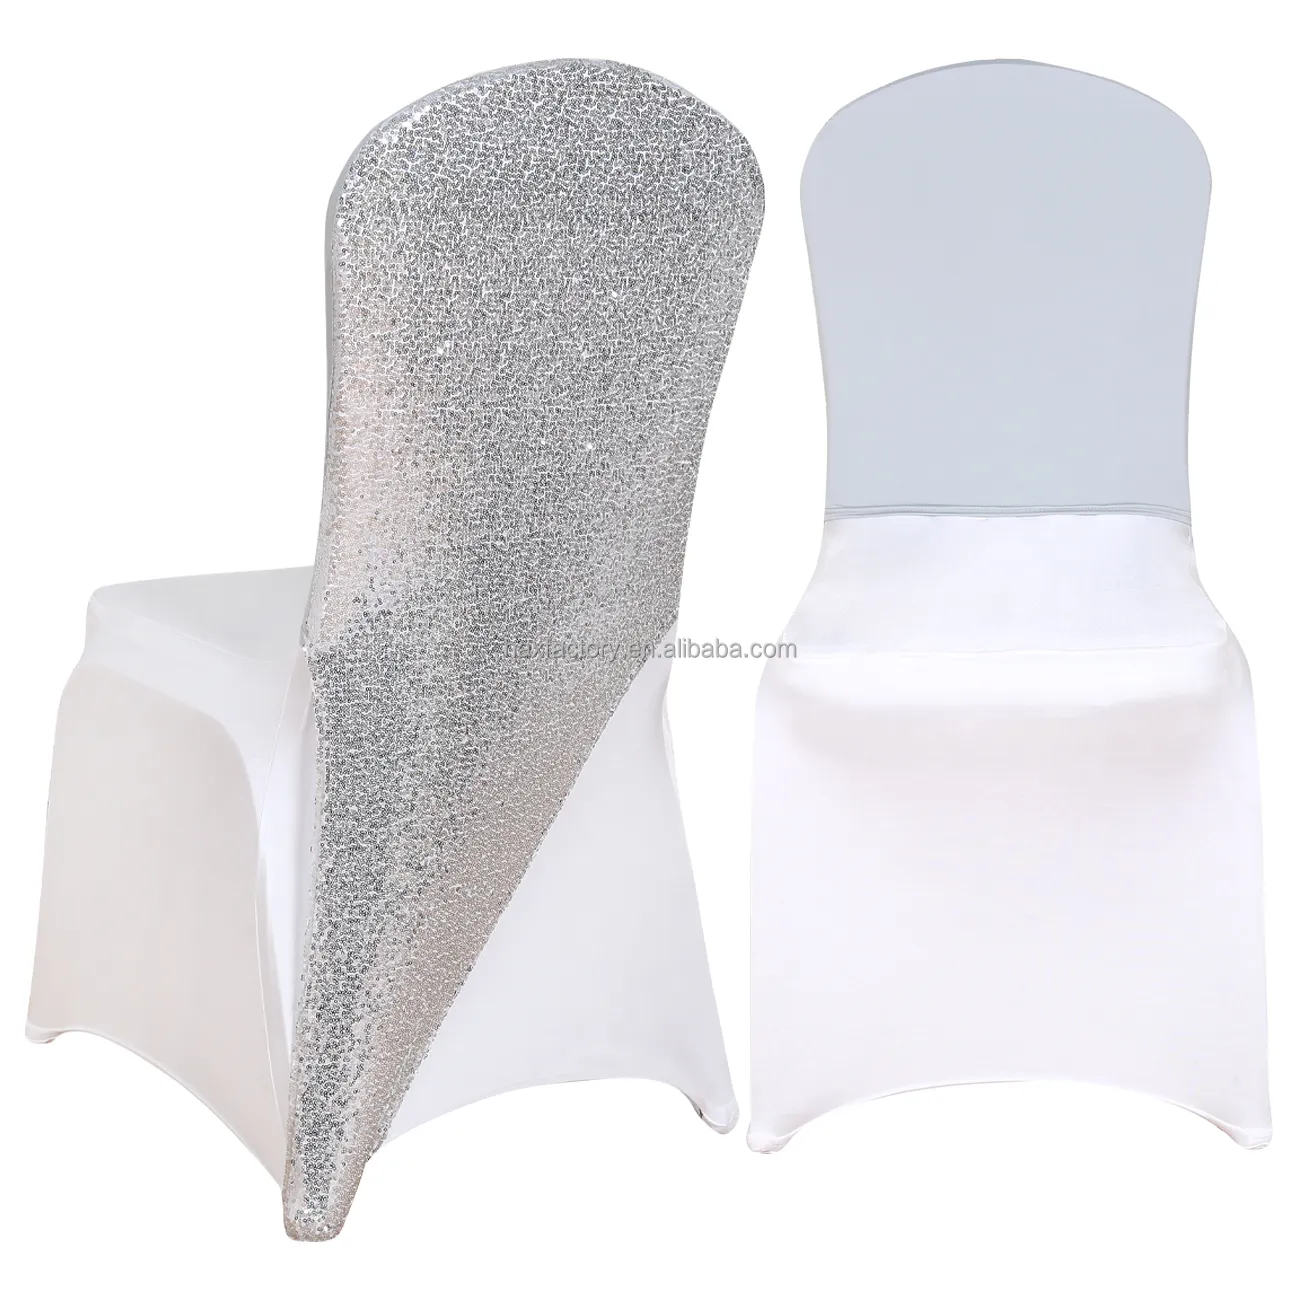 Banquet Chair Cap Covers Sequin Silver Chair Sashes Bands/Hood/Hat for Event Party